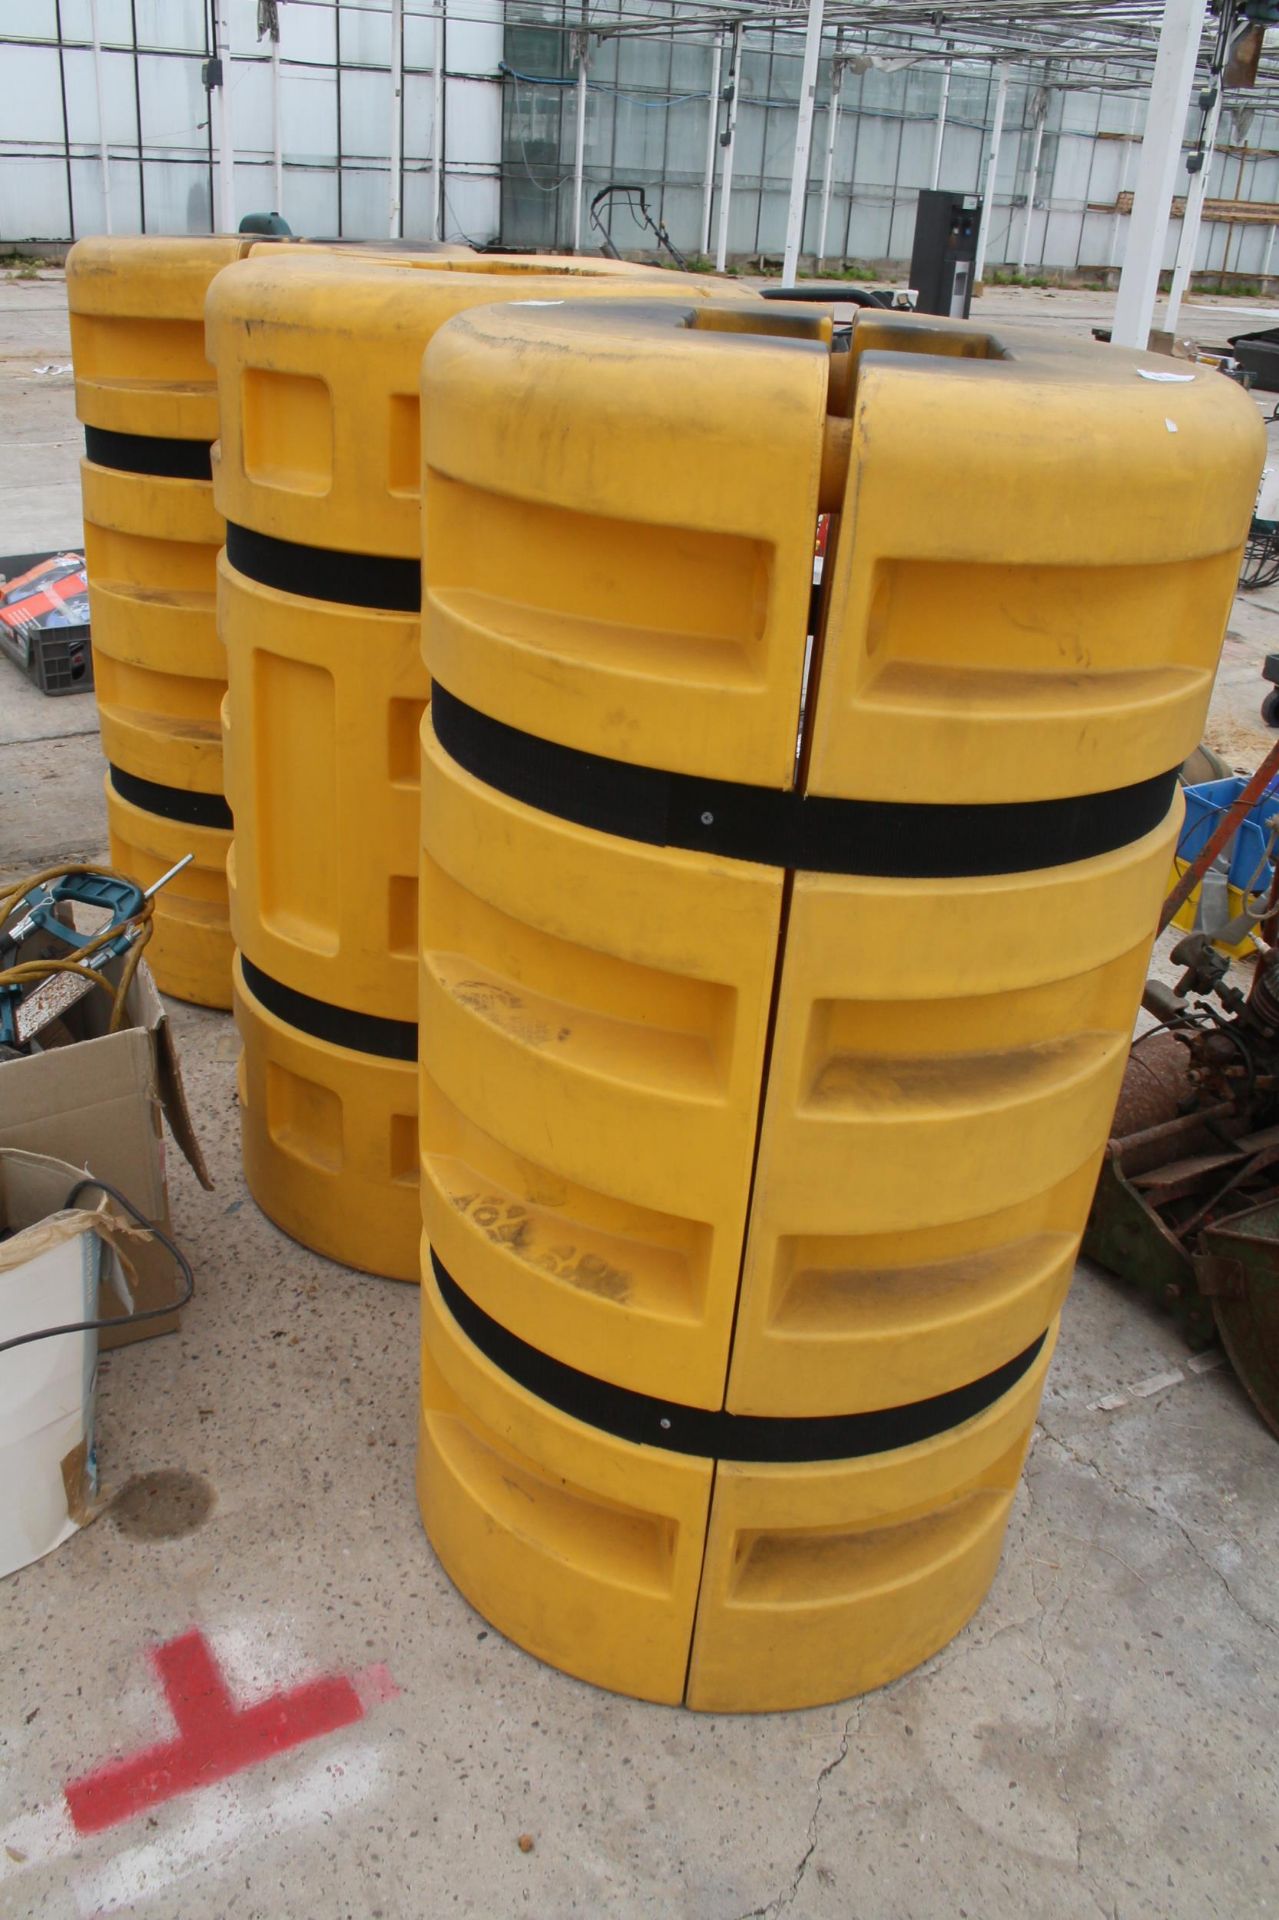 3 YELLOW REMOVABLE CRASH BARRIERS WITH BLACK TIE STRAPS NO VAT - Image 2 of 2